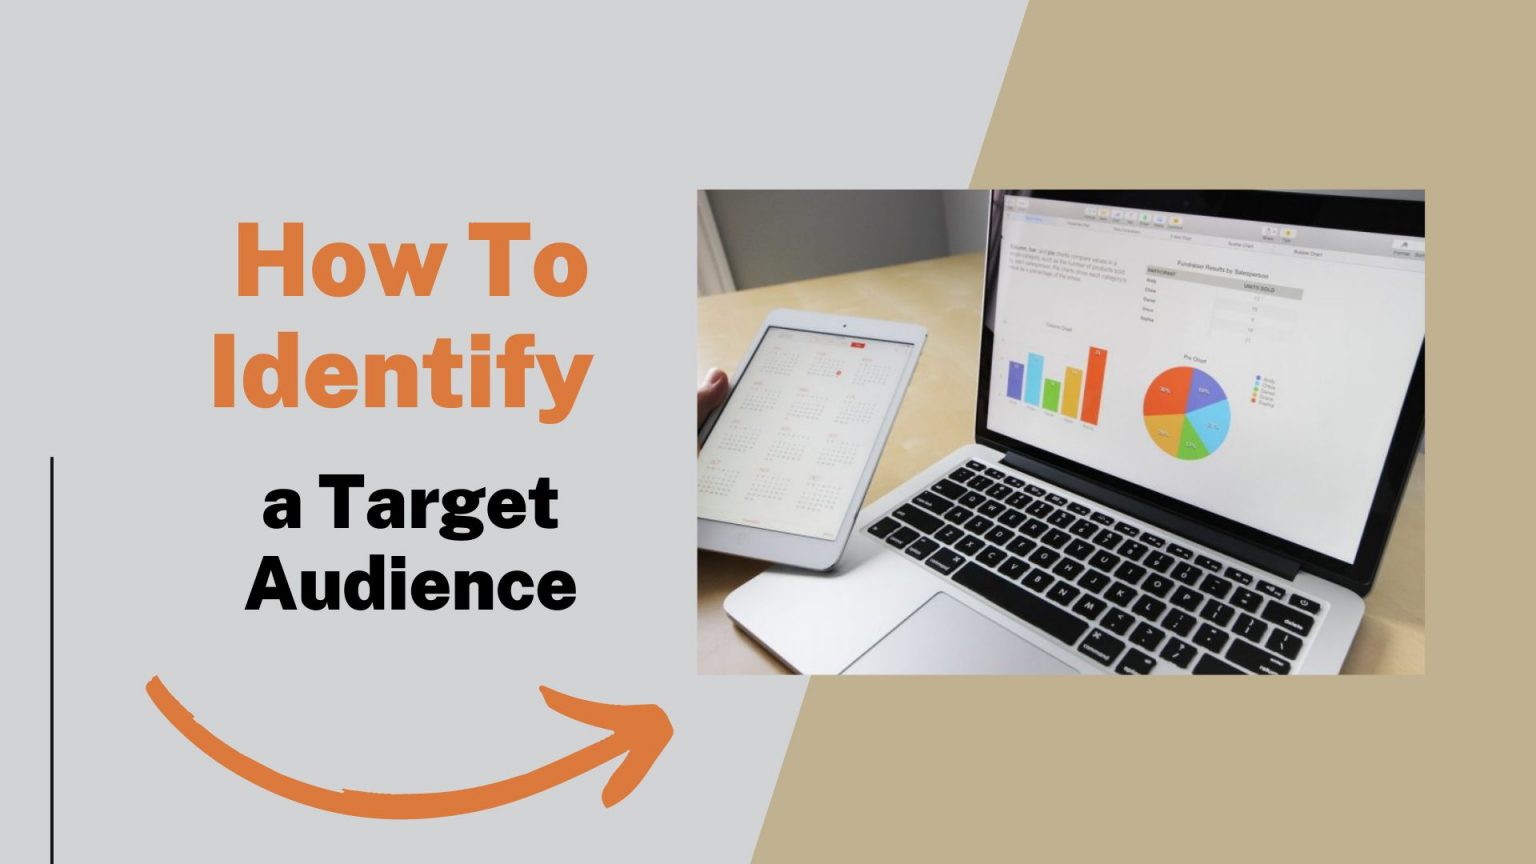 How to identify a target audience